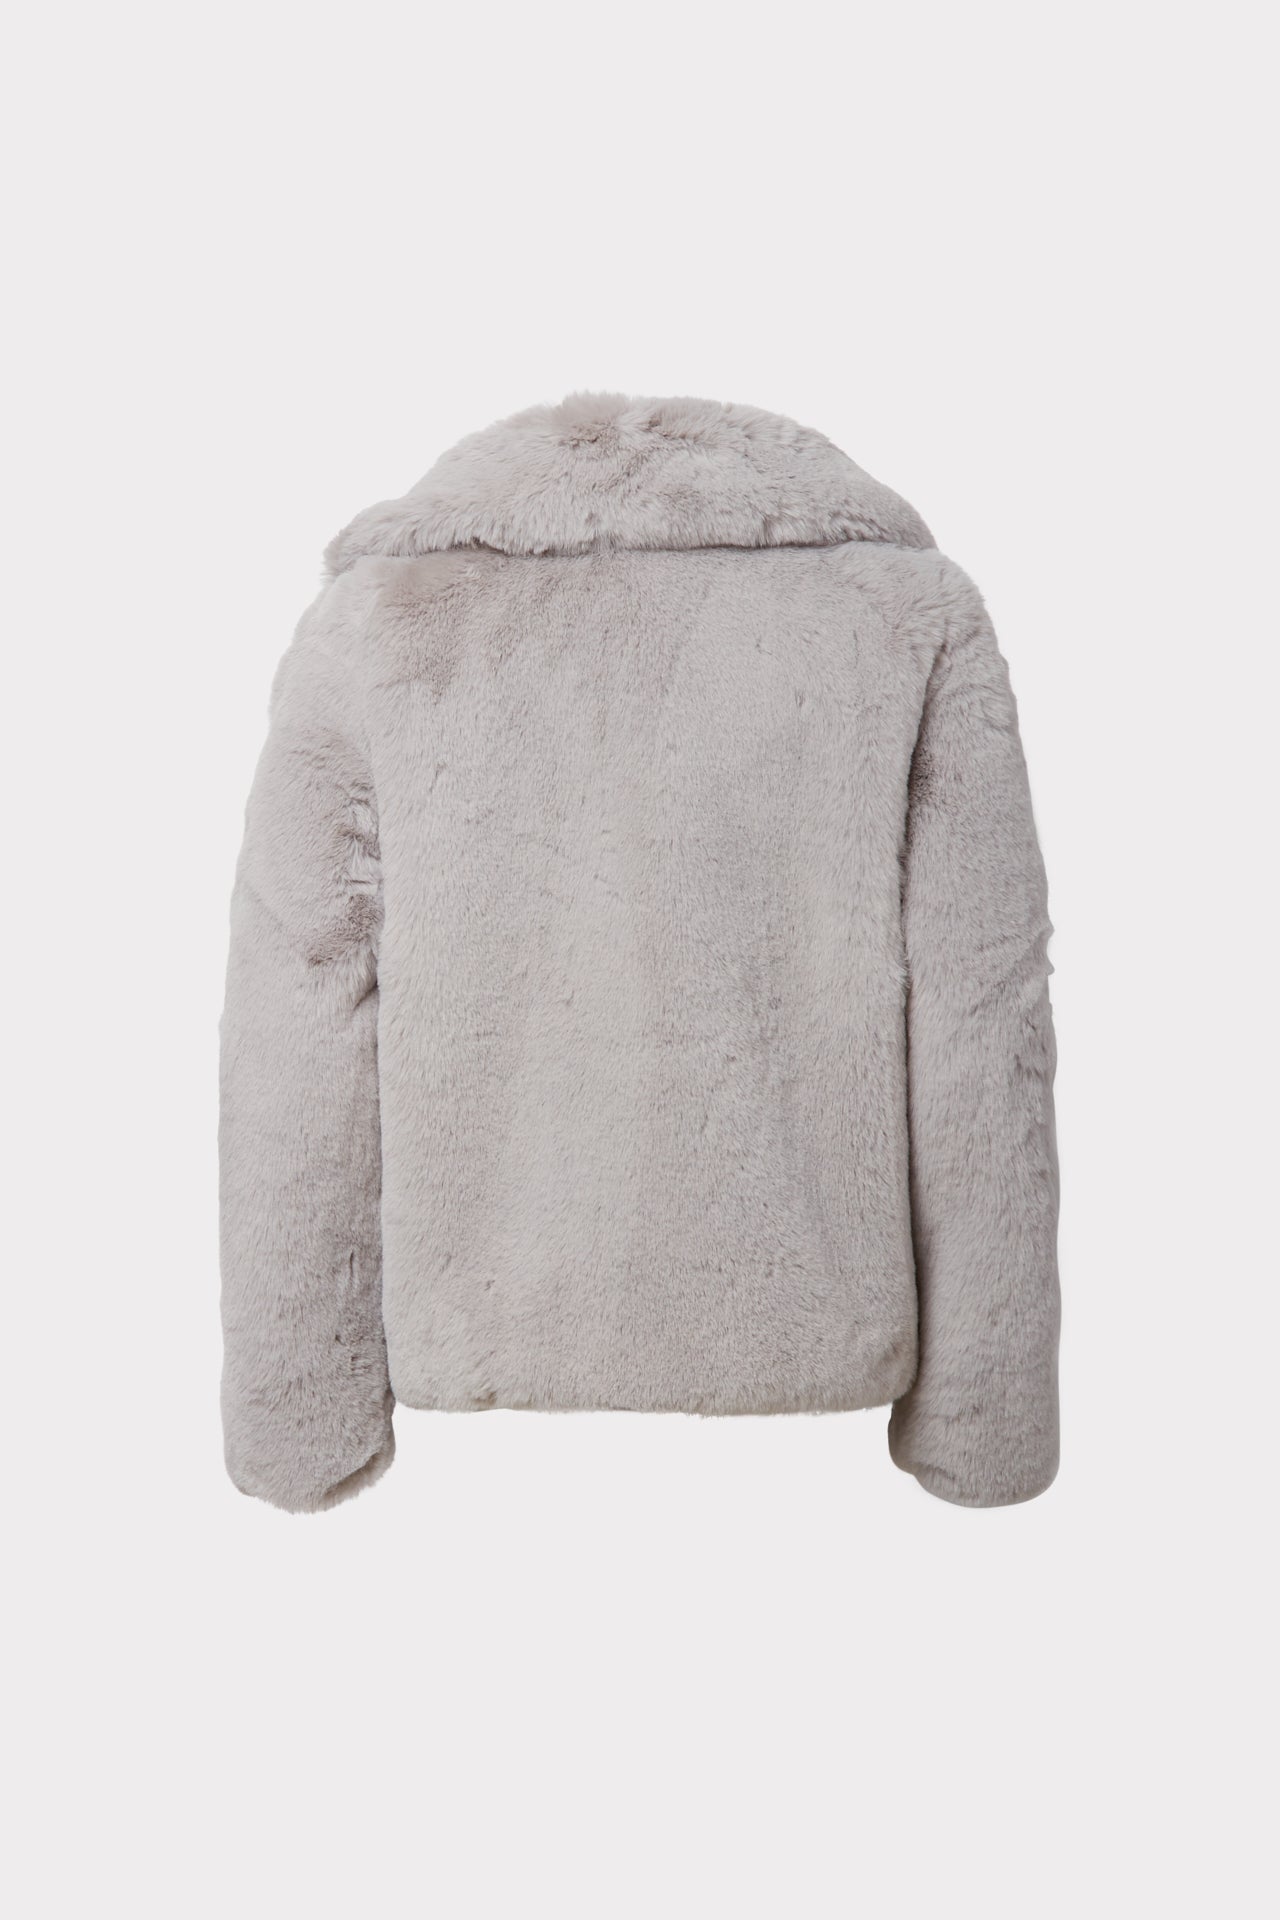 Milly Minis Solid Faux Fur Jacket in ...